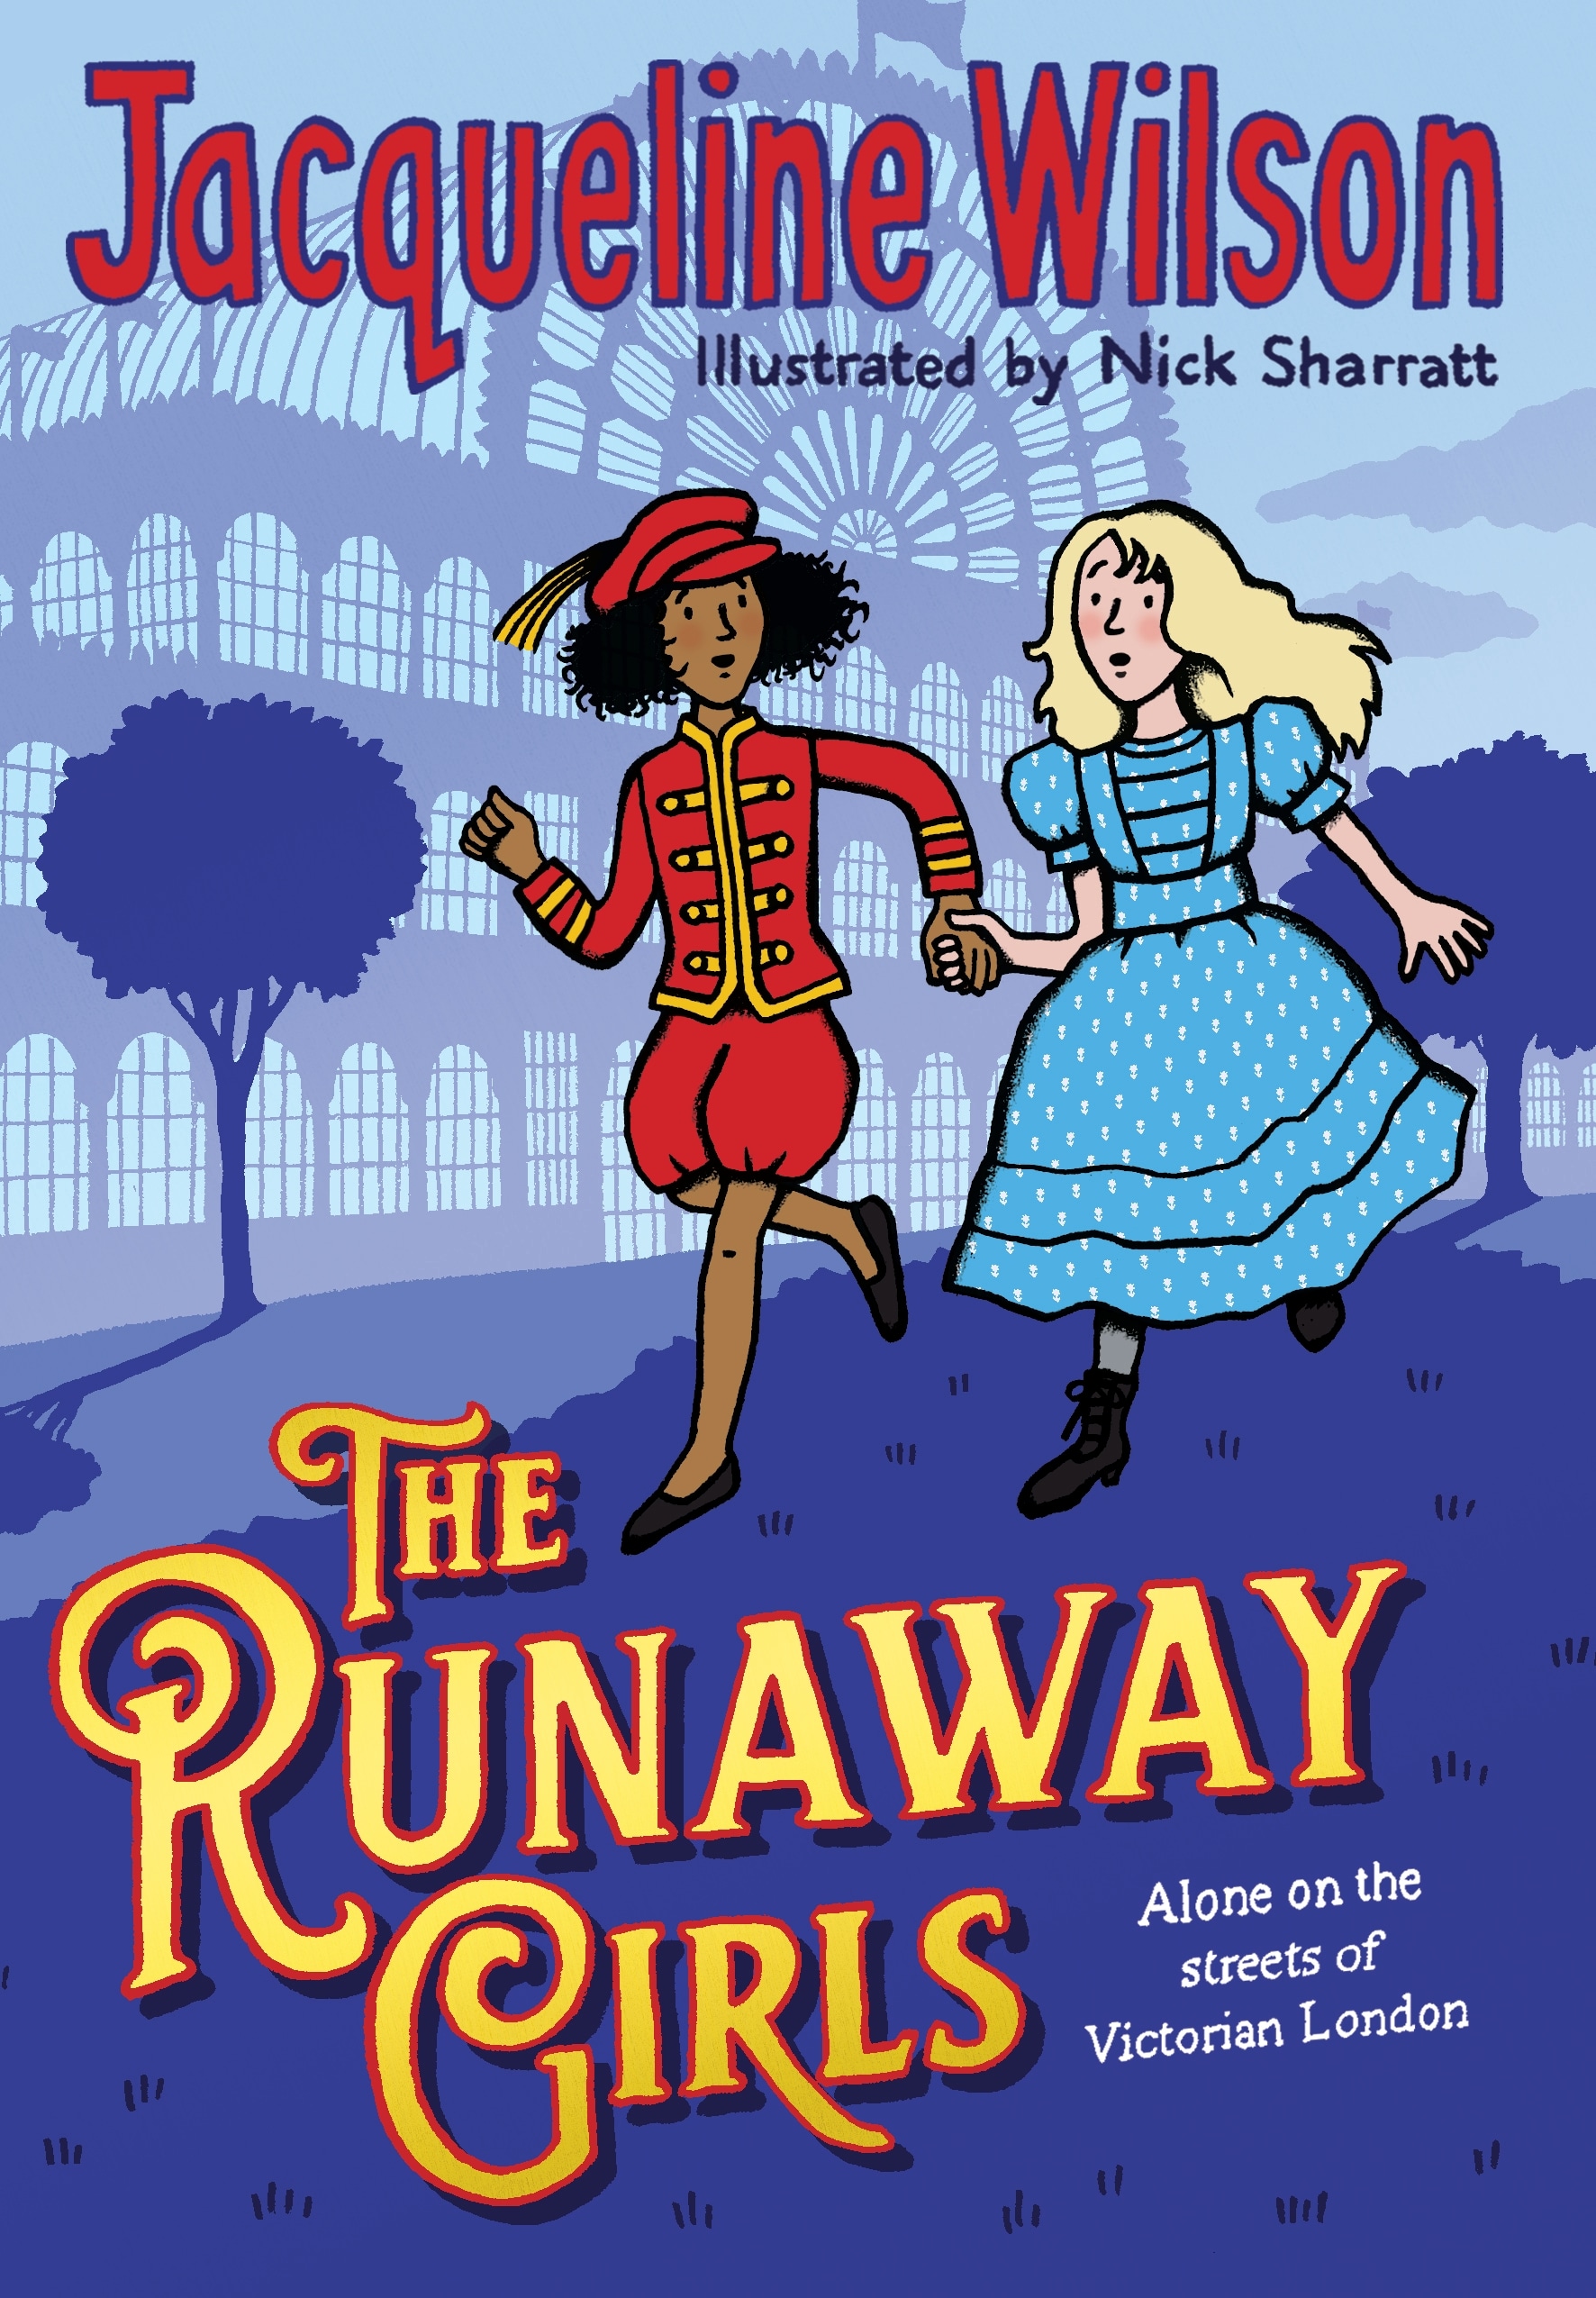 Book “The Runaway Girls” by Jacqueline Wilson — March 18, 2021